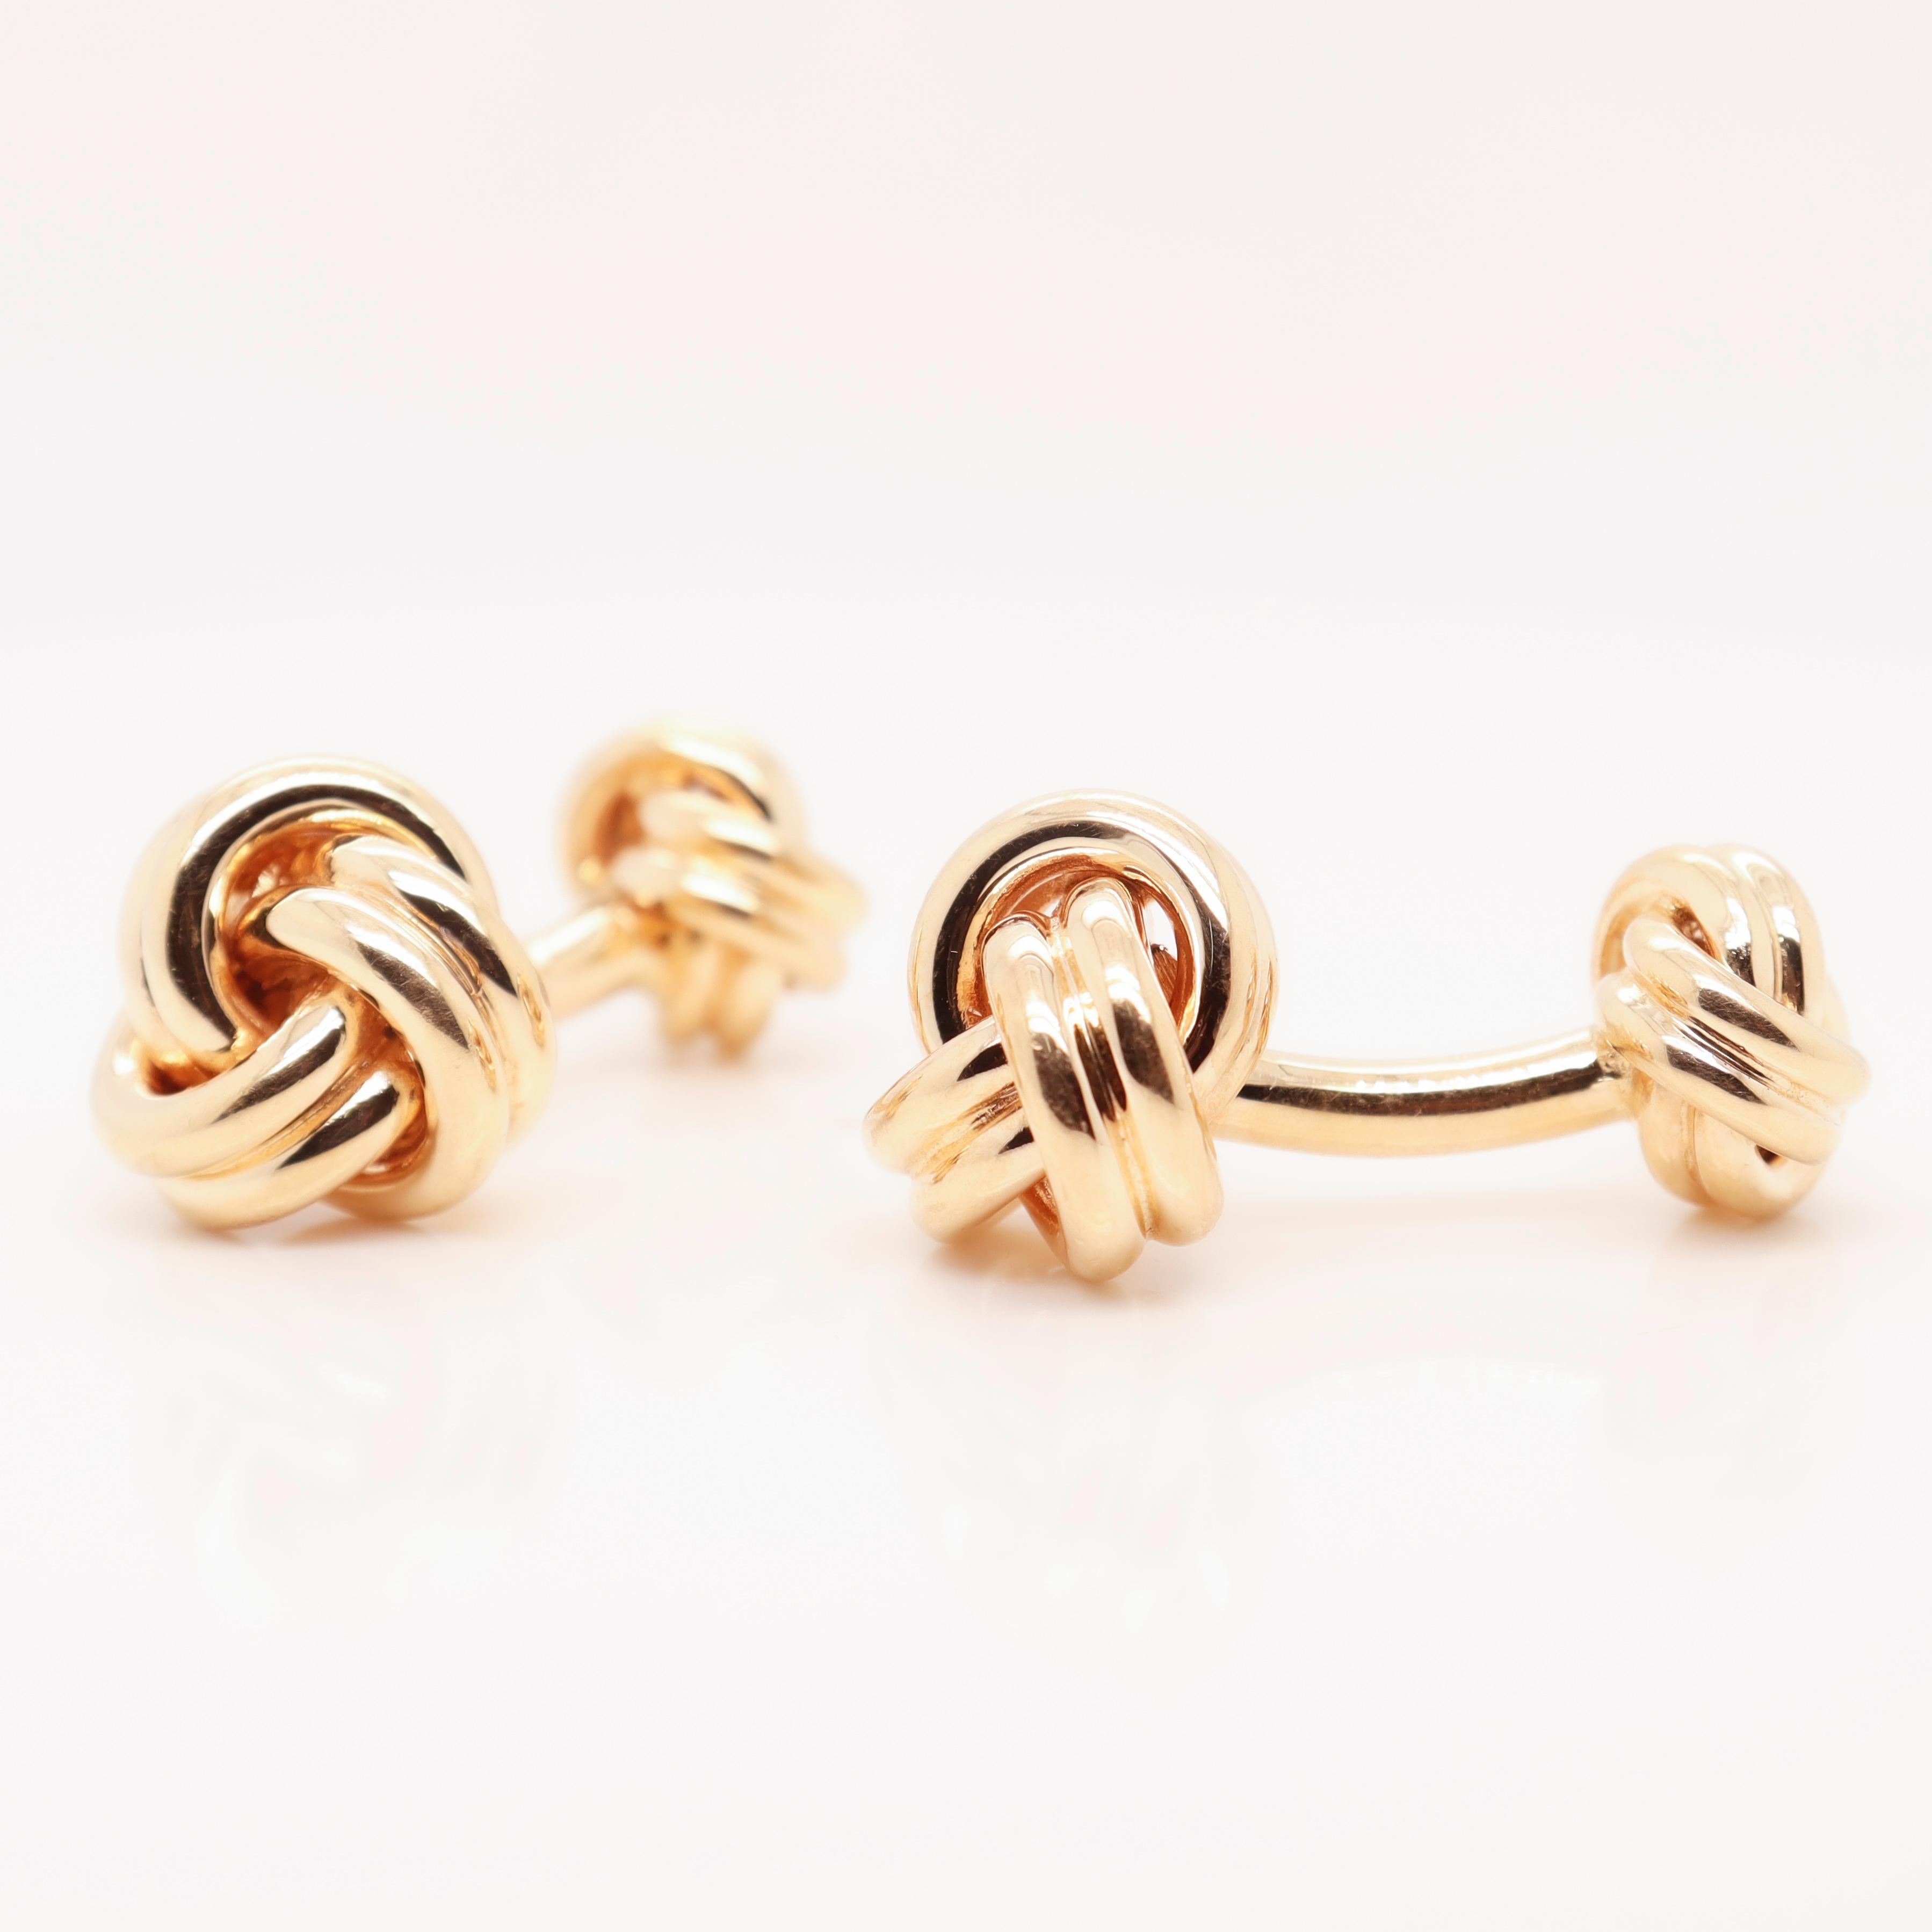 Pair of Tiffany & Co. 14k Gold Double Love Knot Cufflinks 5